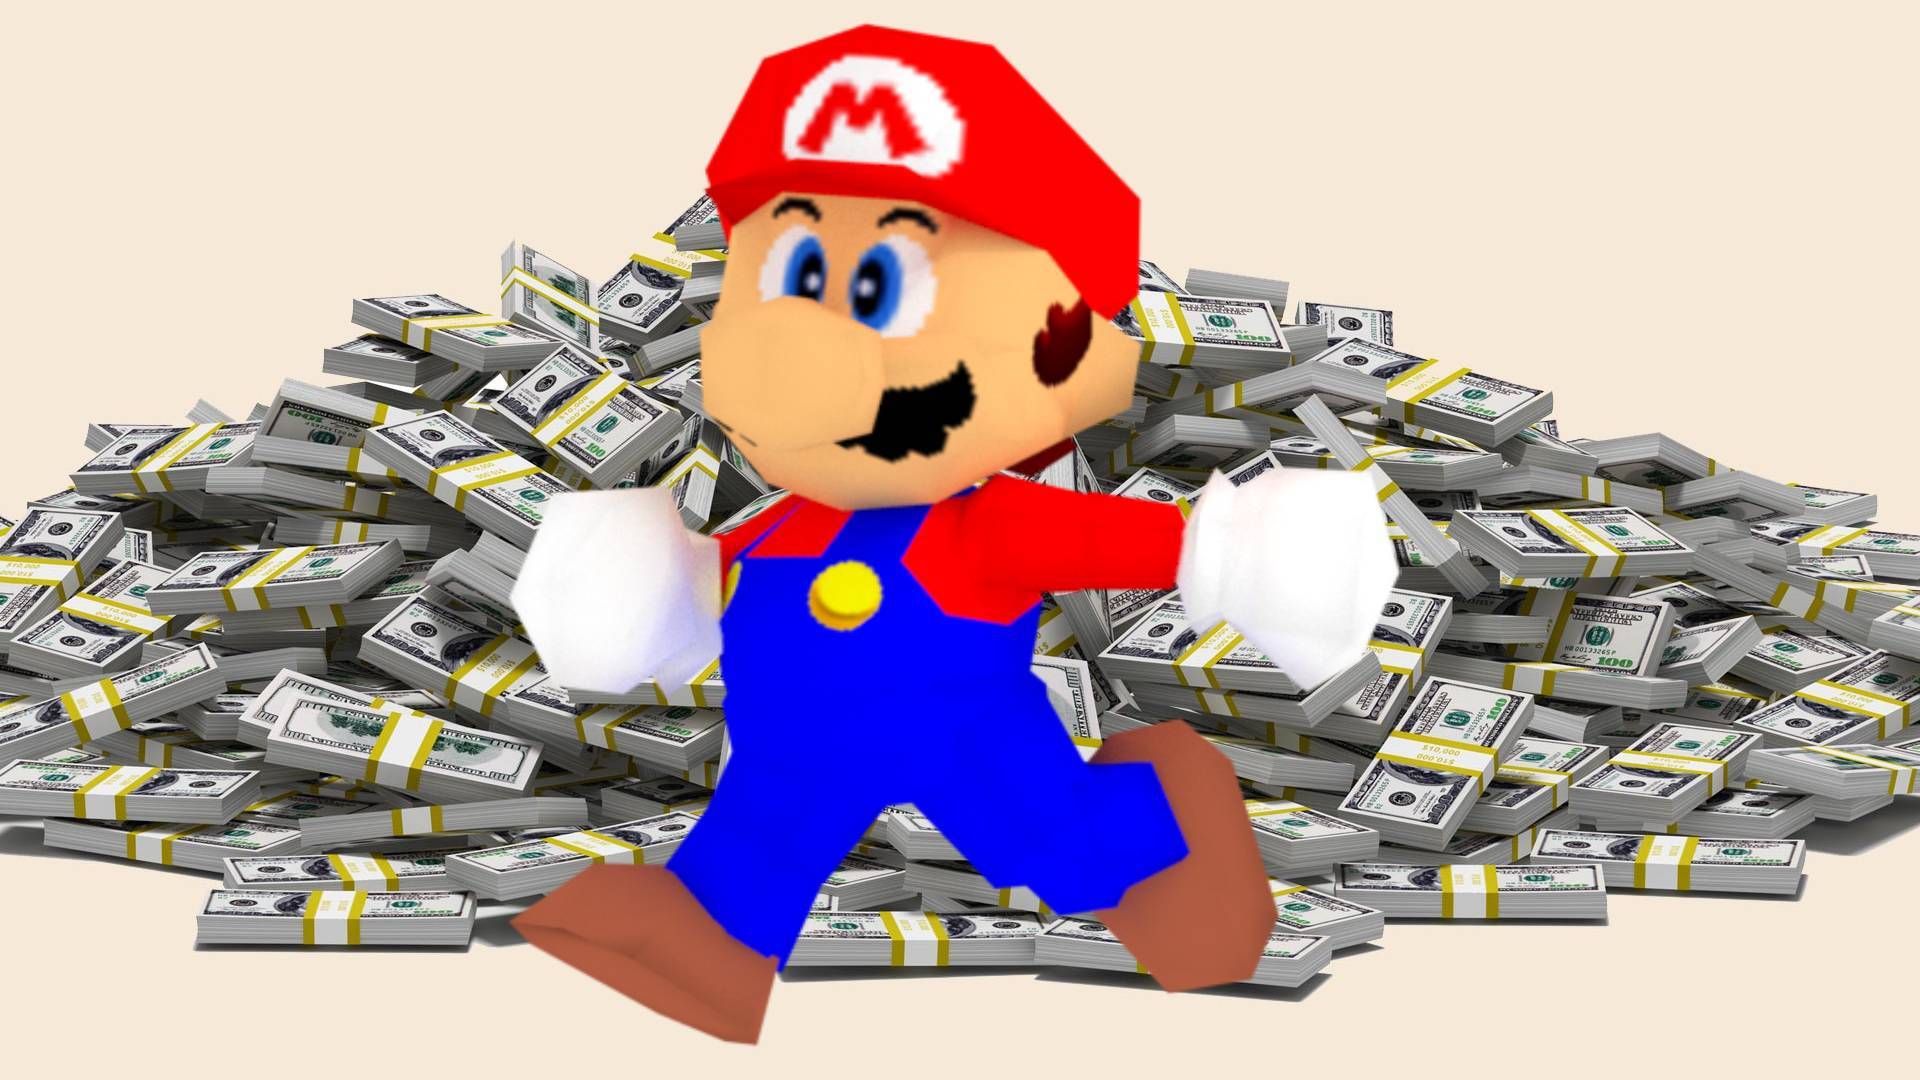 Super Mario 64 sells for $1.5 million at auction - Polygon